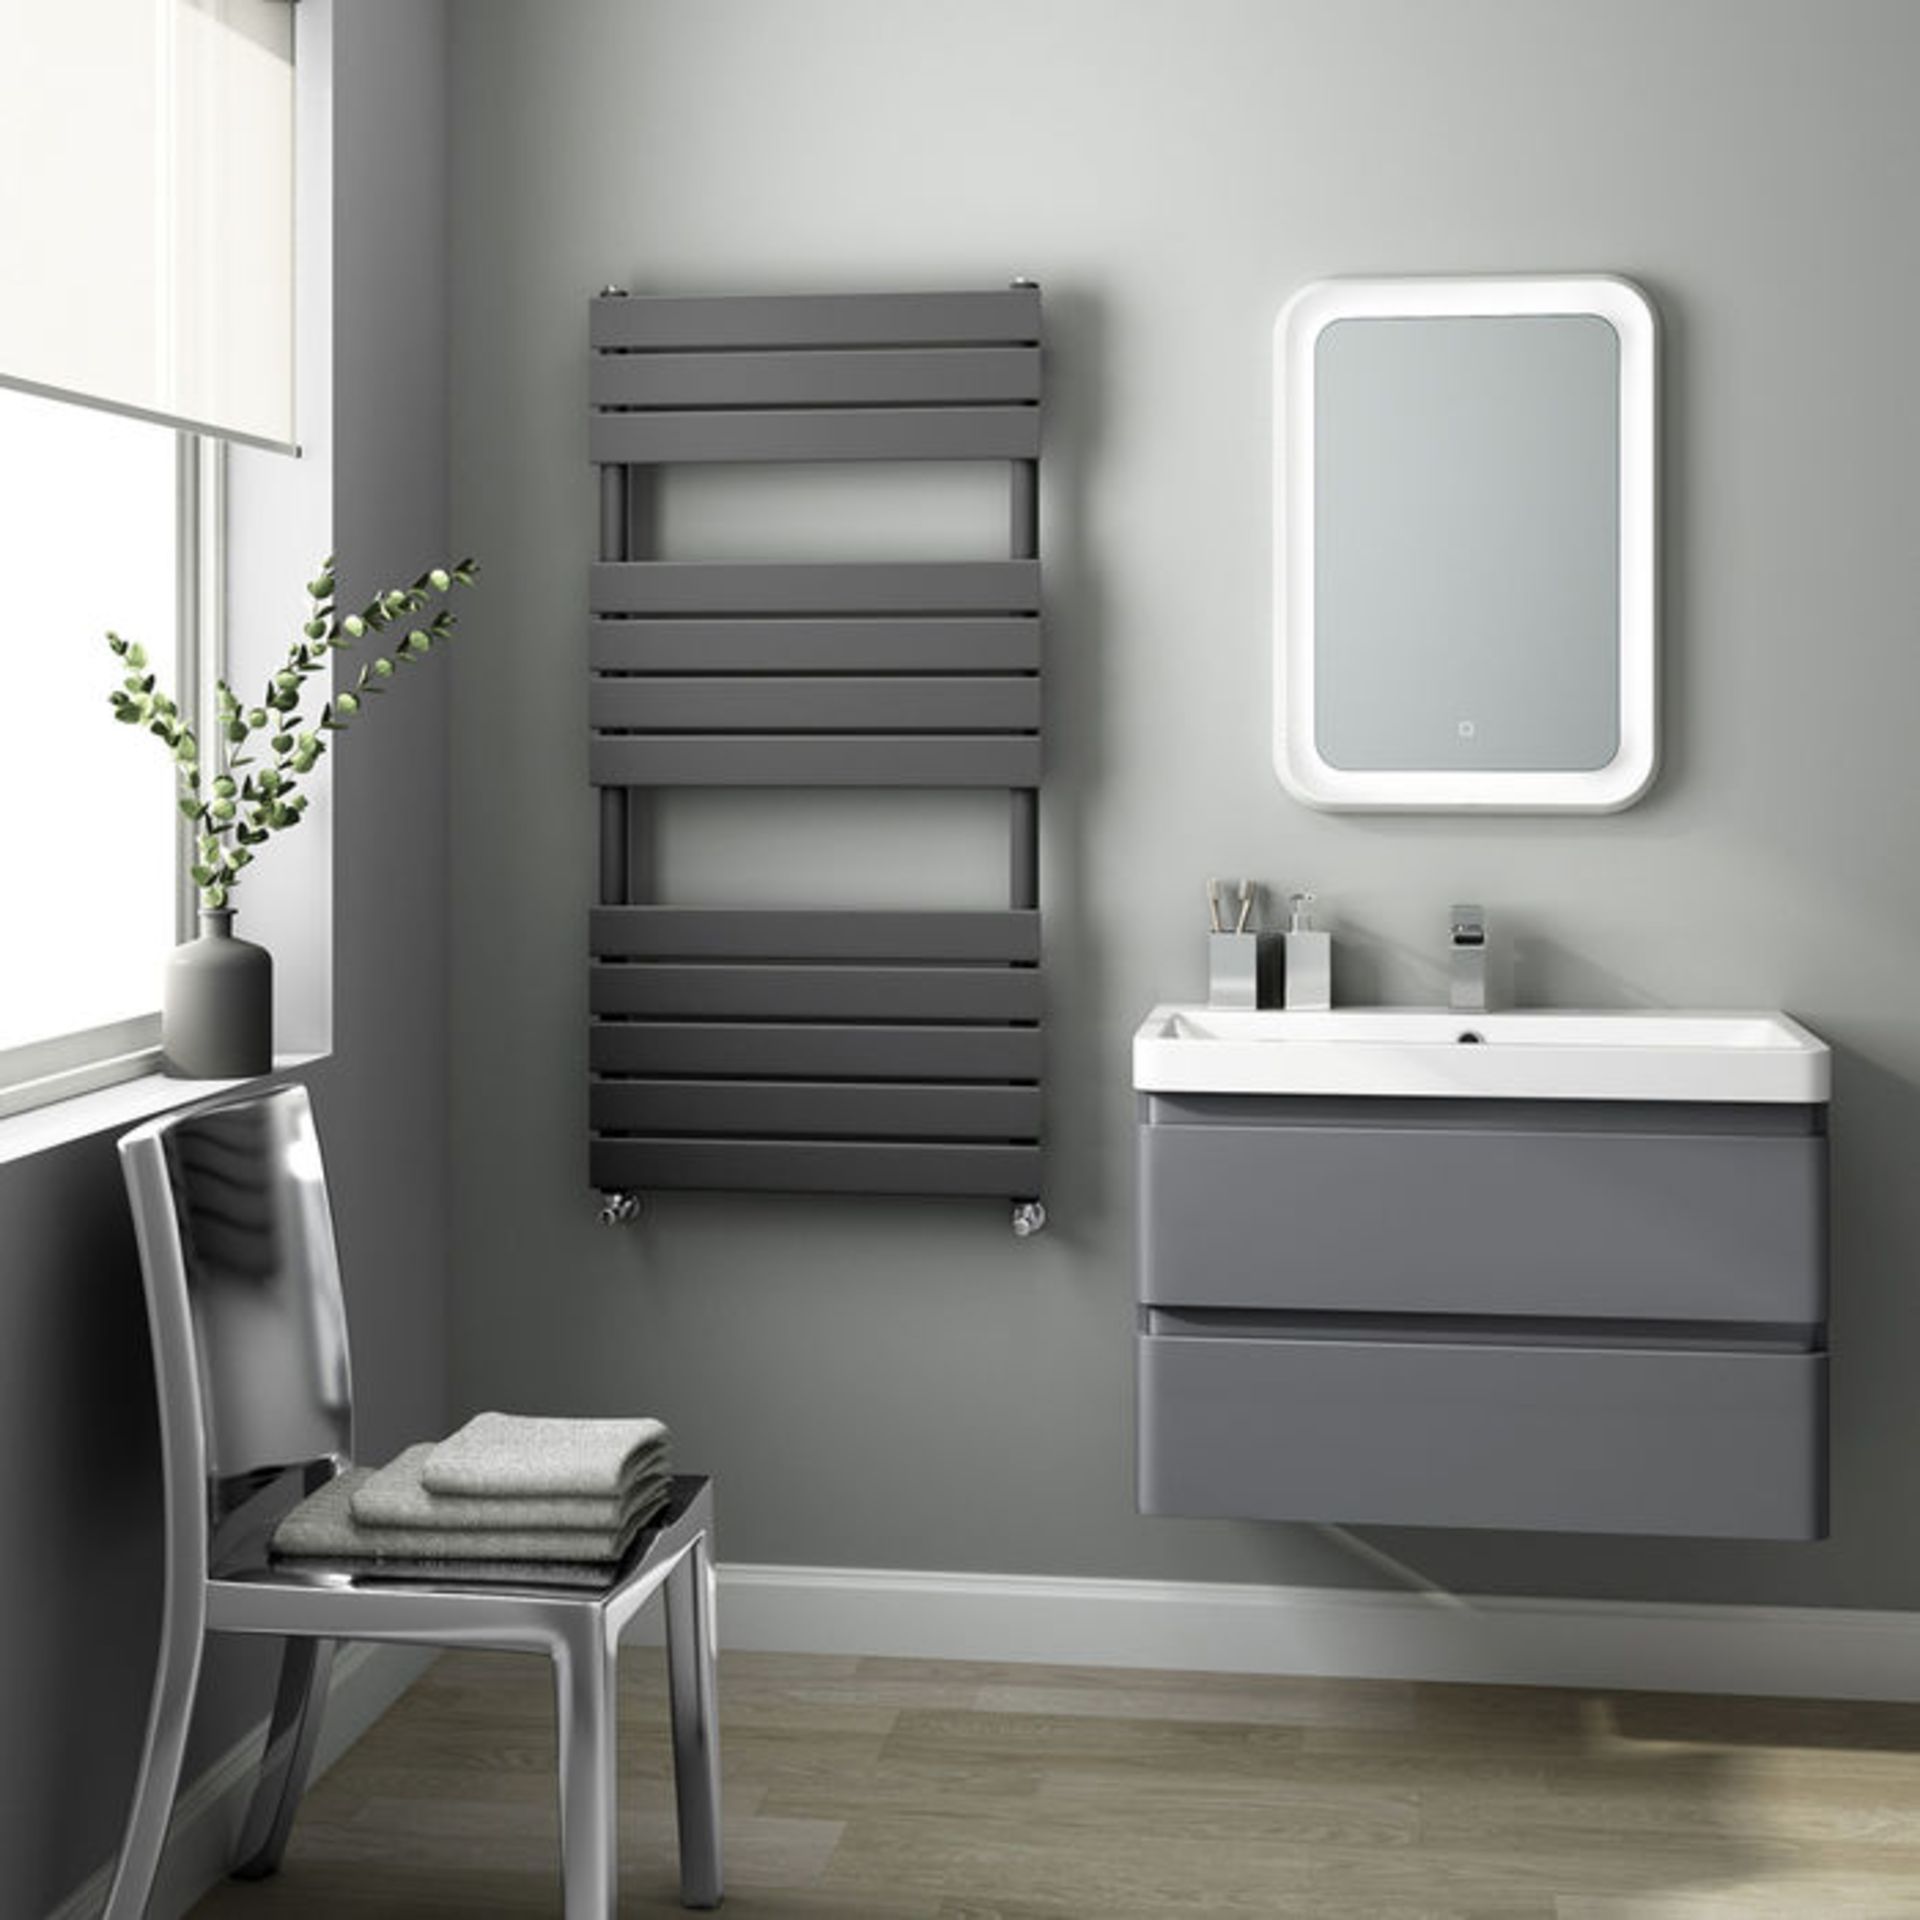 (TP11) 1200x600mm Anthracite Flat Panel Ladder Towel Radiator. Made with low carbon steel, - Image 2 of 3